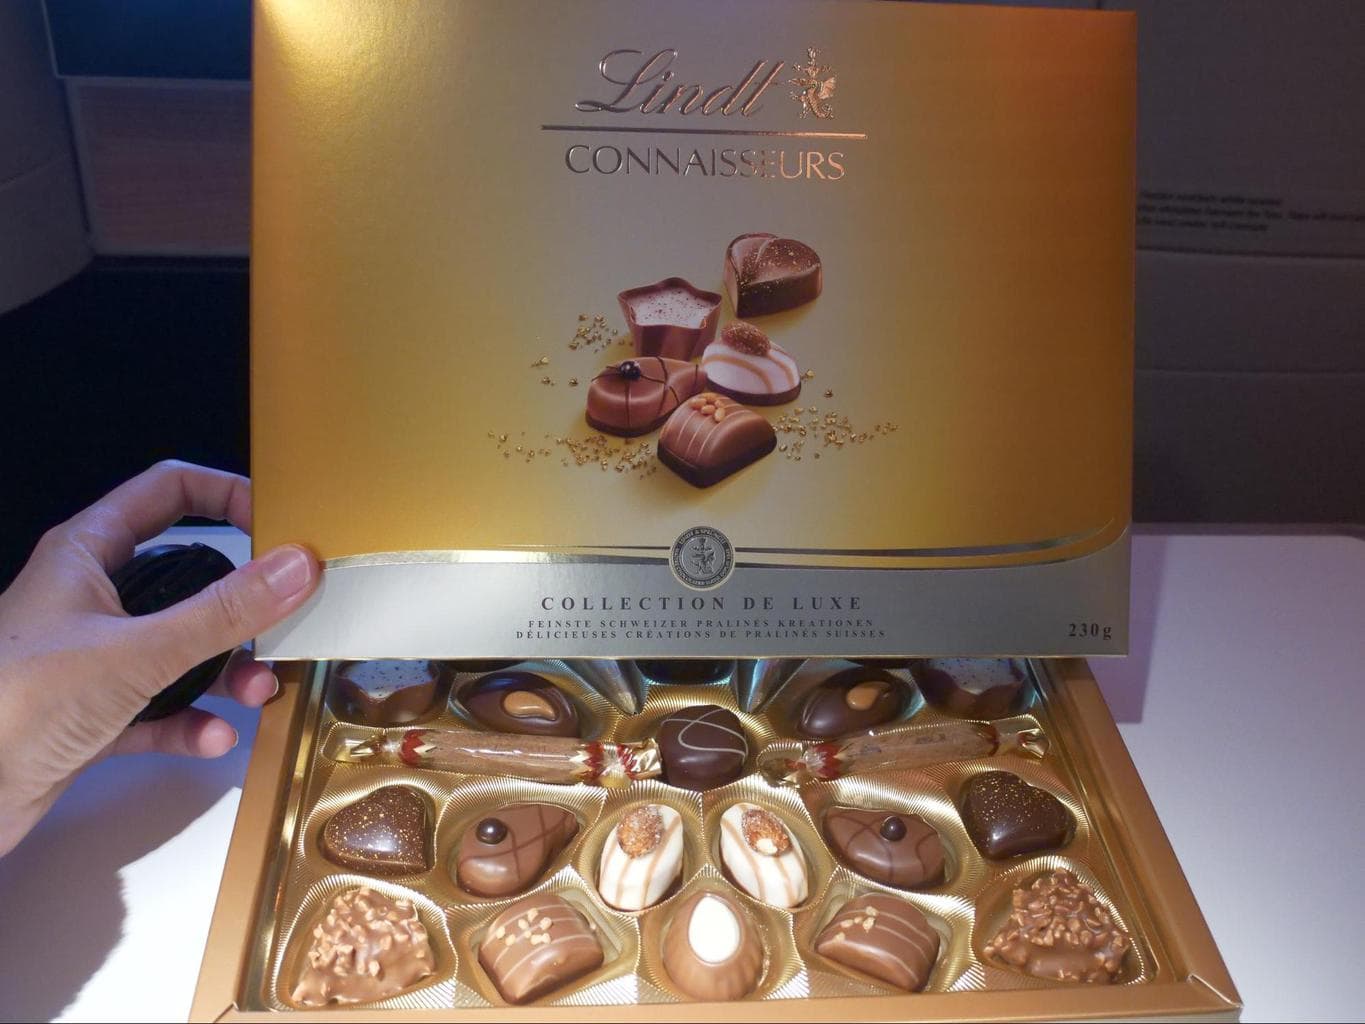 Lindt chocolates to end food service in Swiss Business Class